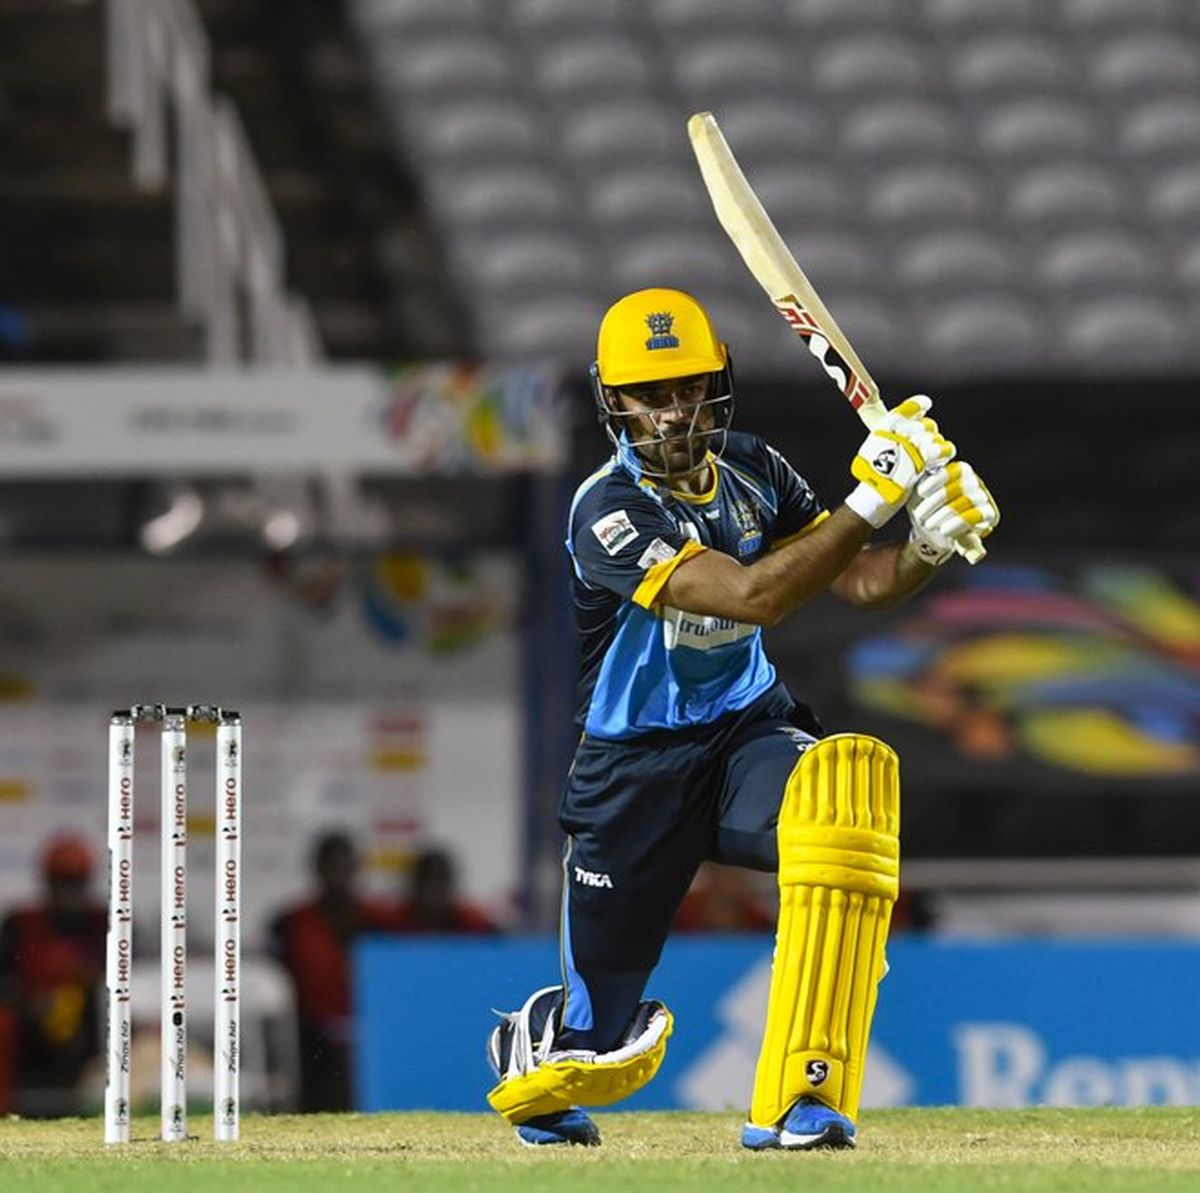 Barbados Tridents' Rashid Khan bats during his innings of 26 against St Kitts & Nevis Patriots in their opening match of the Caribbean Premier League on Tuesday